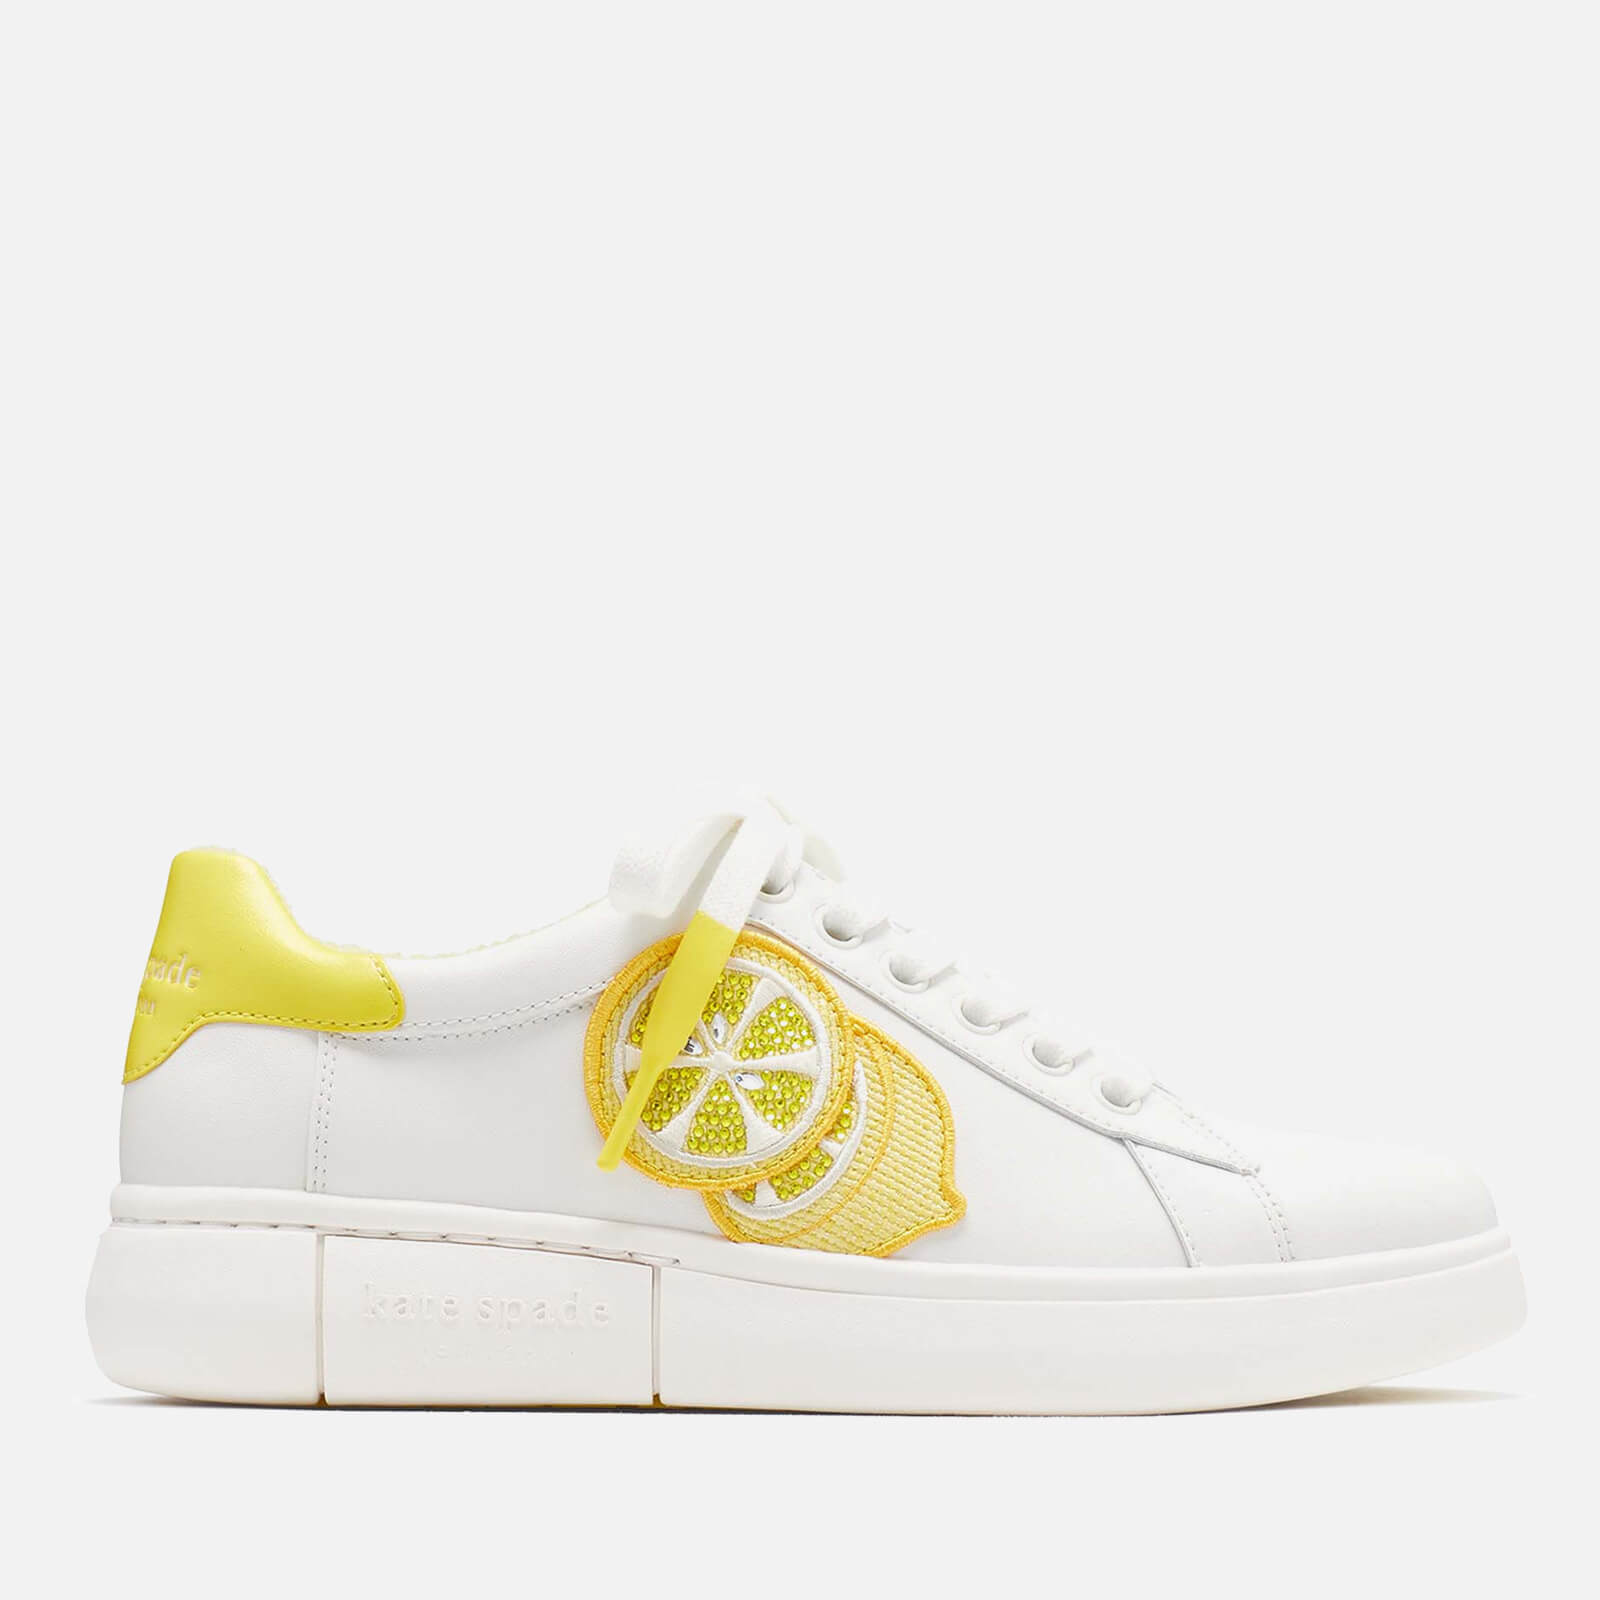 Kate Spade New York Women’s Lift Leather Trainers